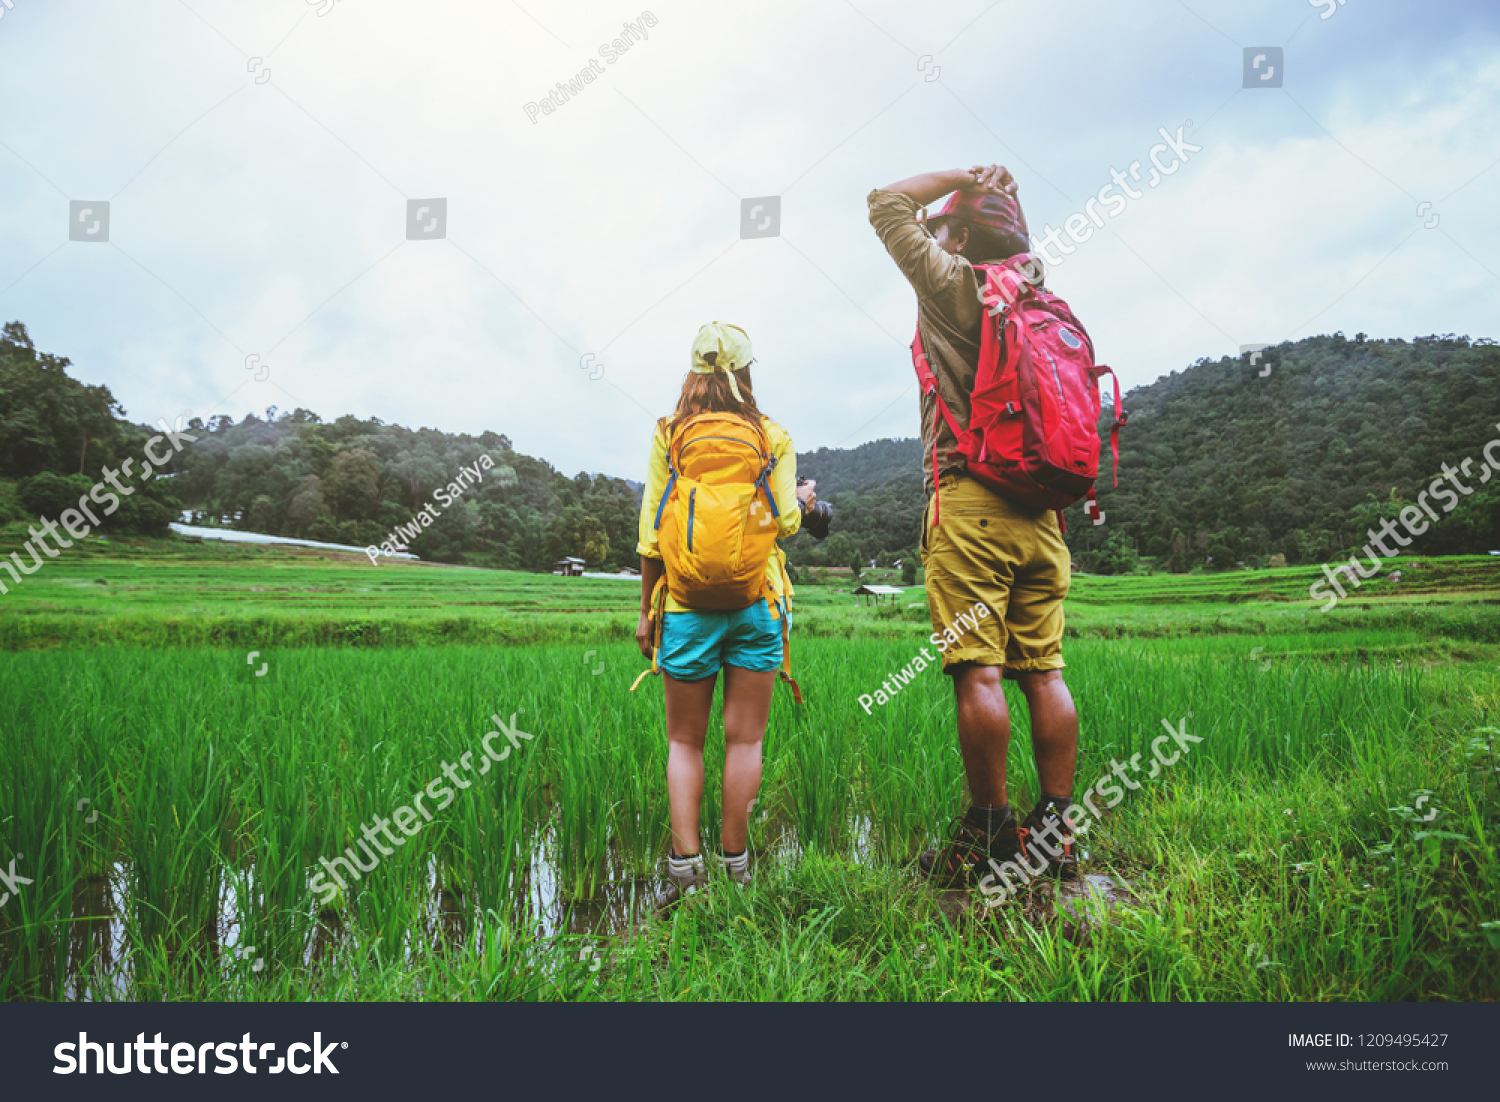 Lover asian man asian women travel nature Travel relax Walking a photo on the rice field in rainy season in Chiang Mai, Thailand #1209495427